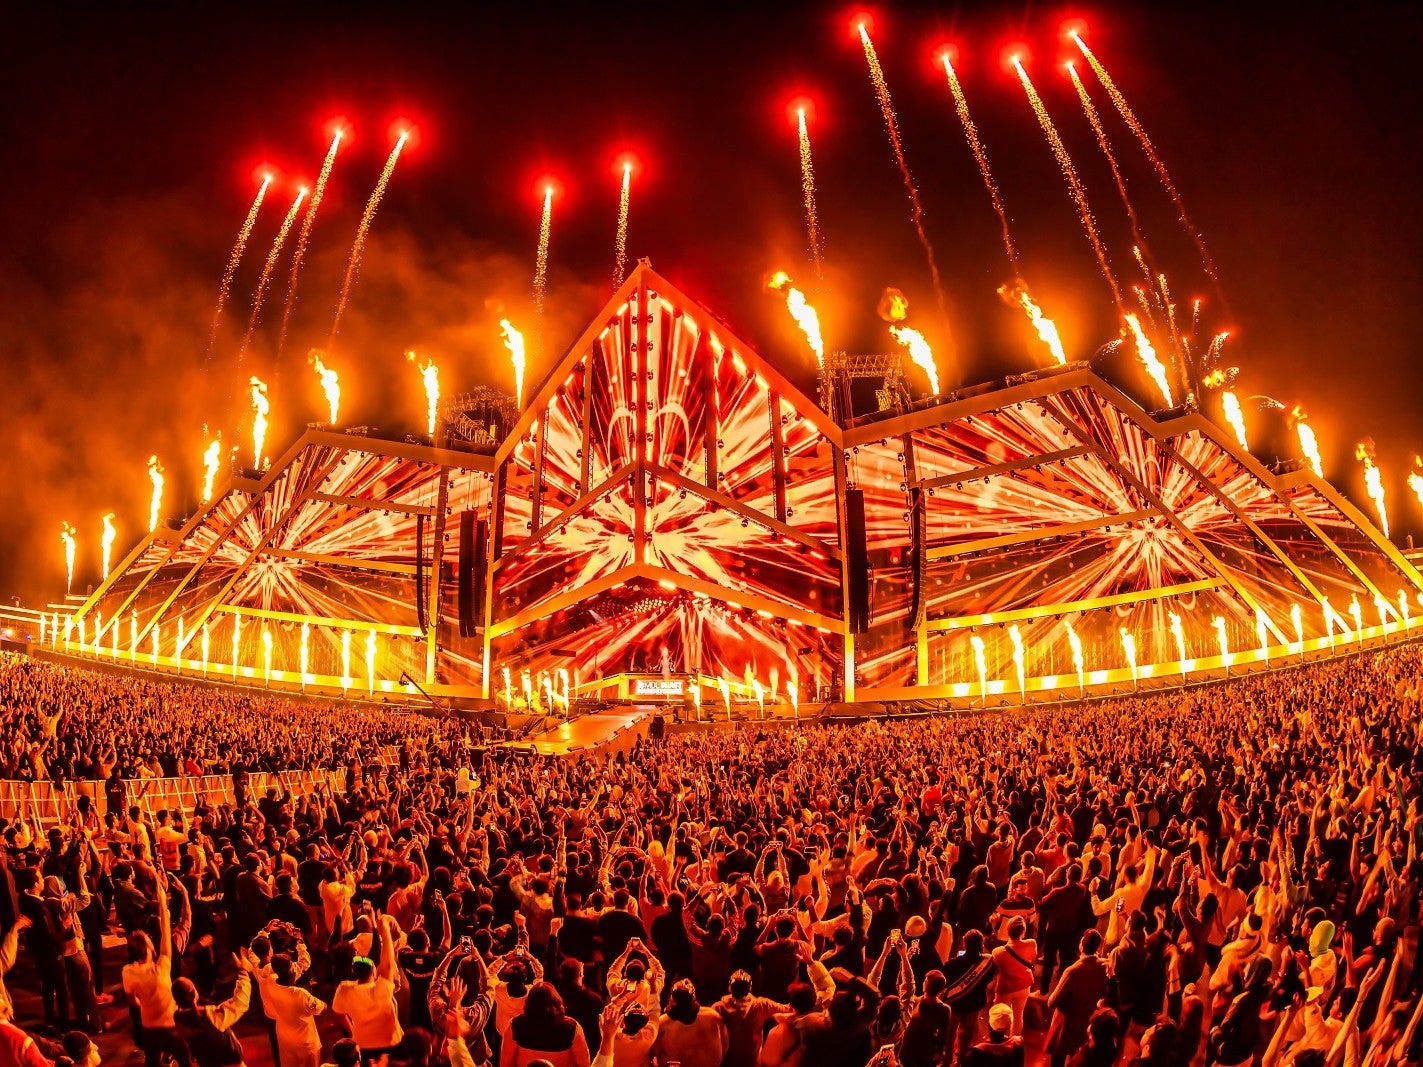 Soundstorm’s ‘Big Beast’ stage explodes fire into the night on day one of the festival